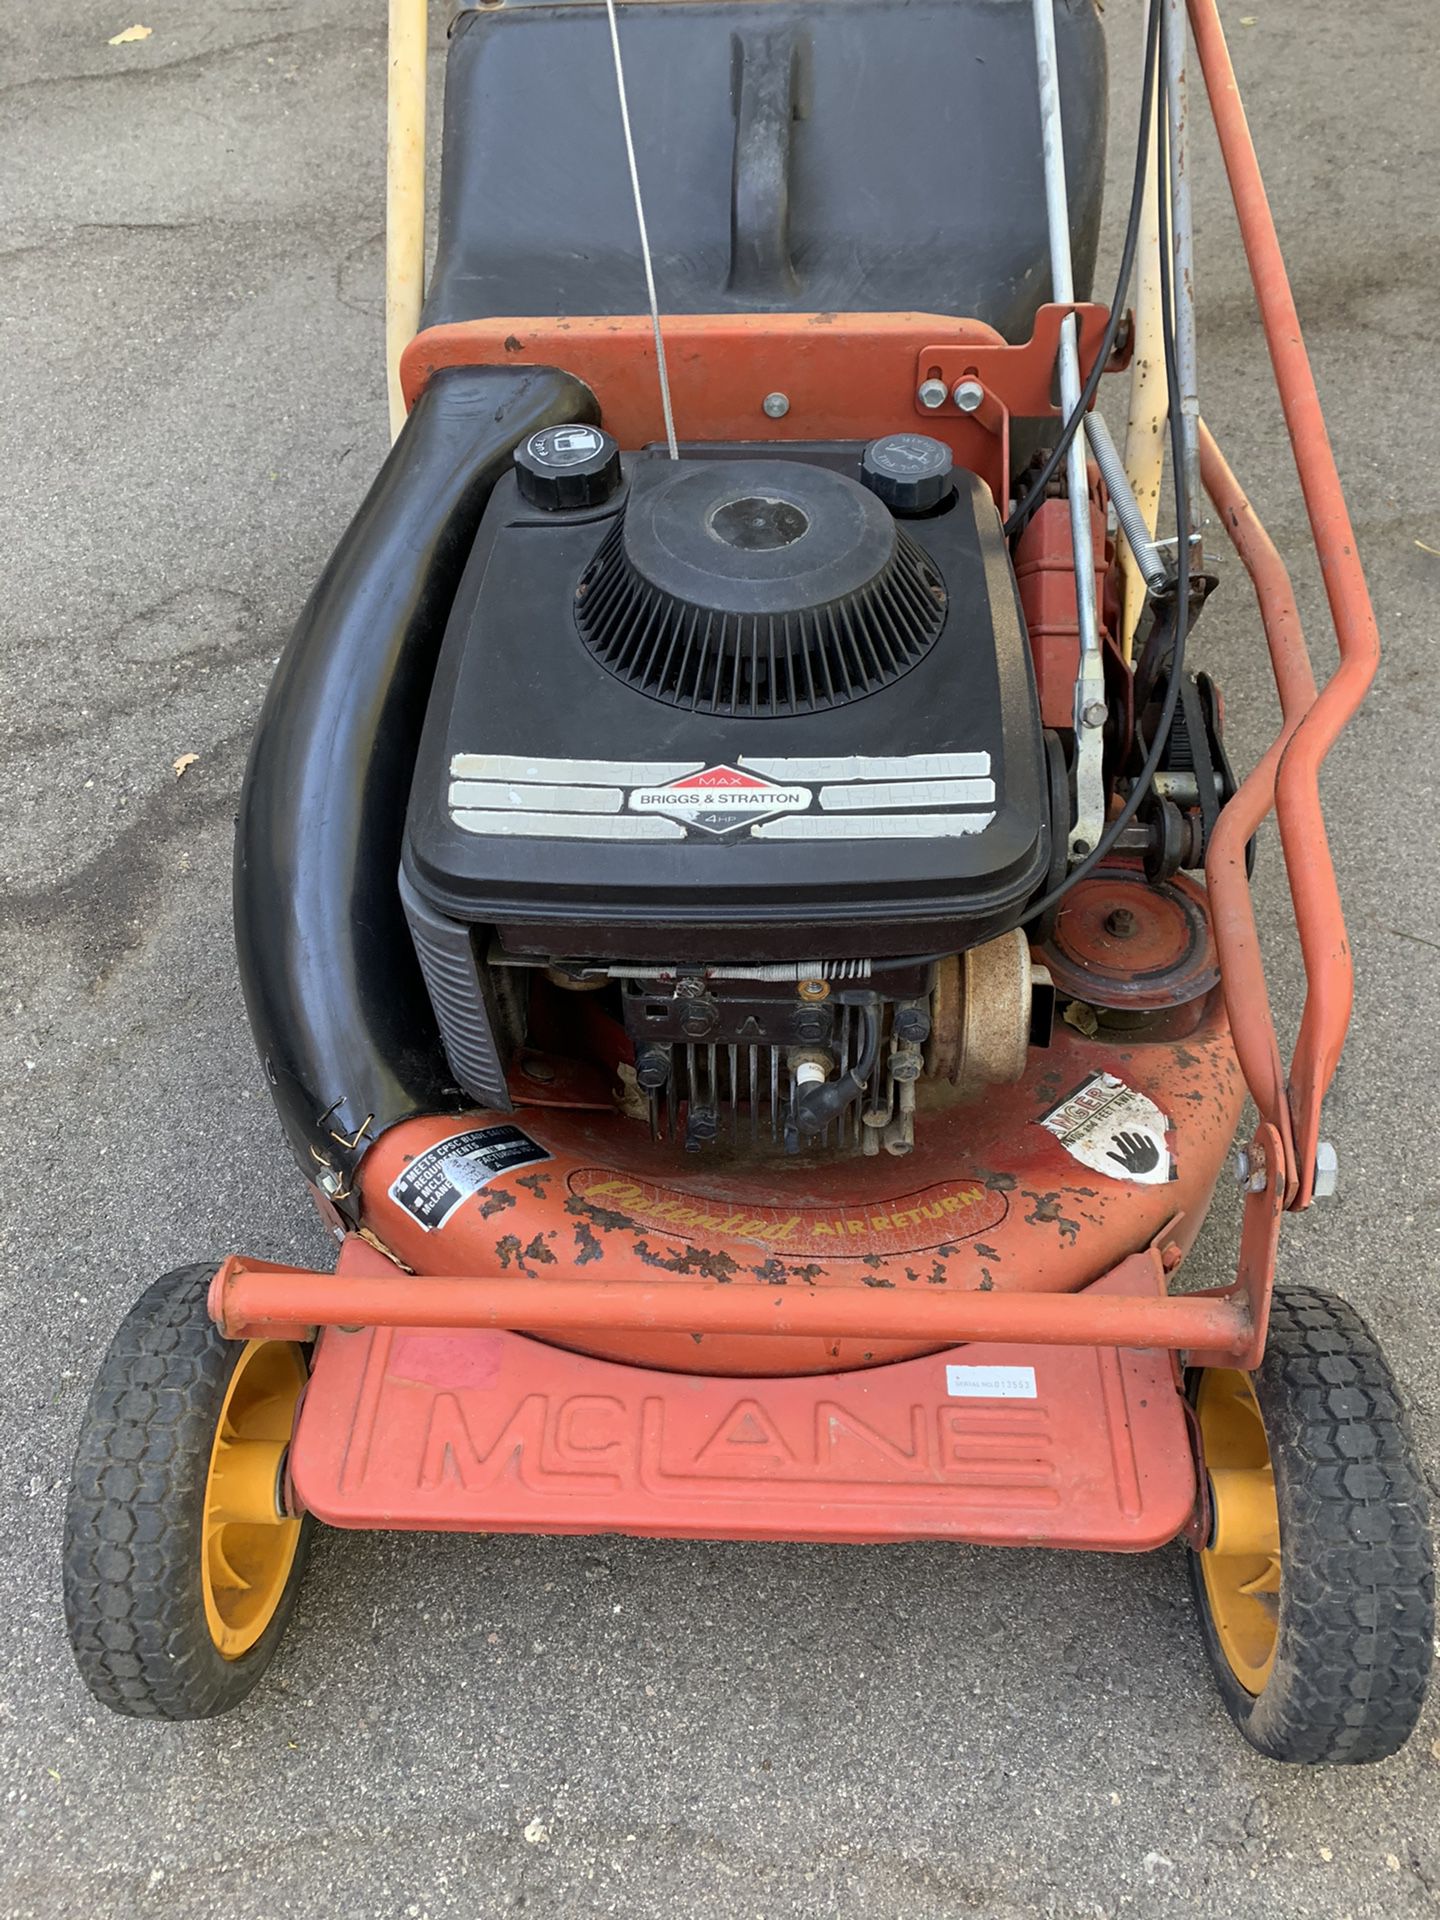 MCLANE COMMERCIAL 21 INCH MOWER